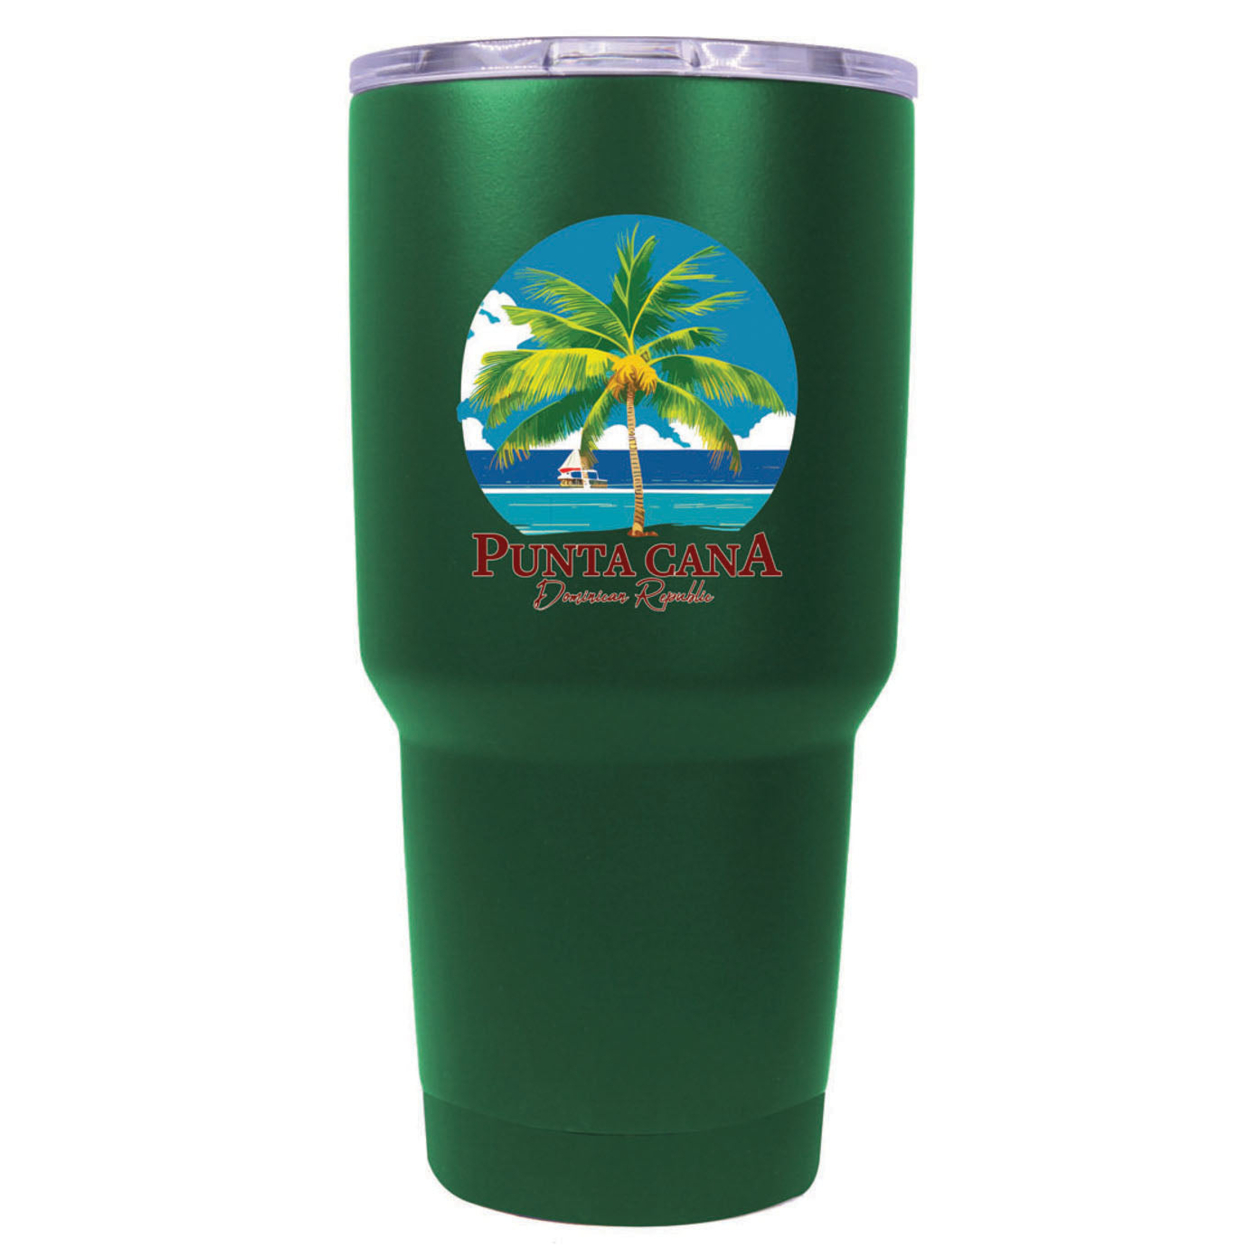 Punta Cana Dominican Republic Souvenir 24 Oz Insulated Stainless Steel Tumbler - Rose Gold, PARROT B